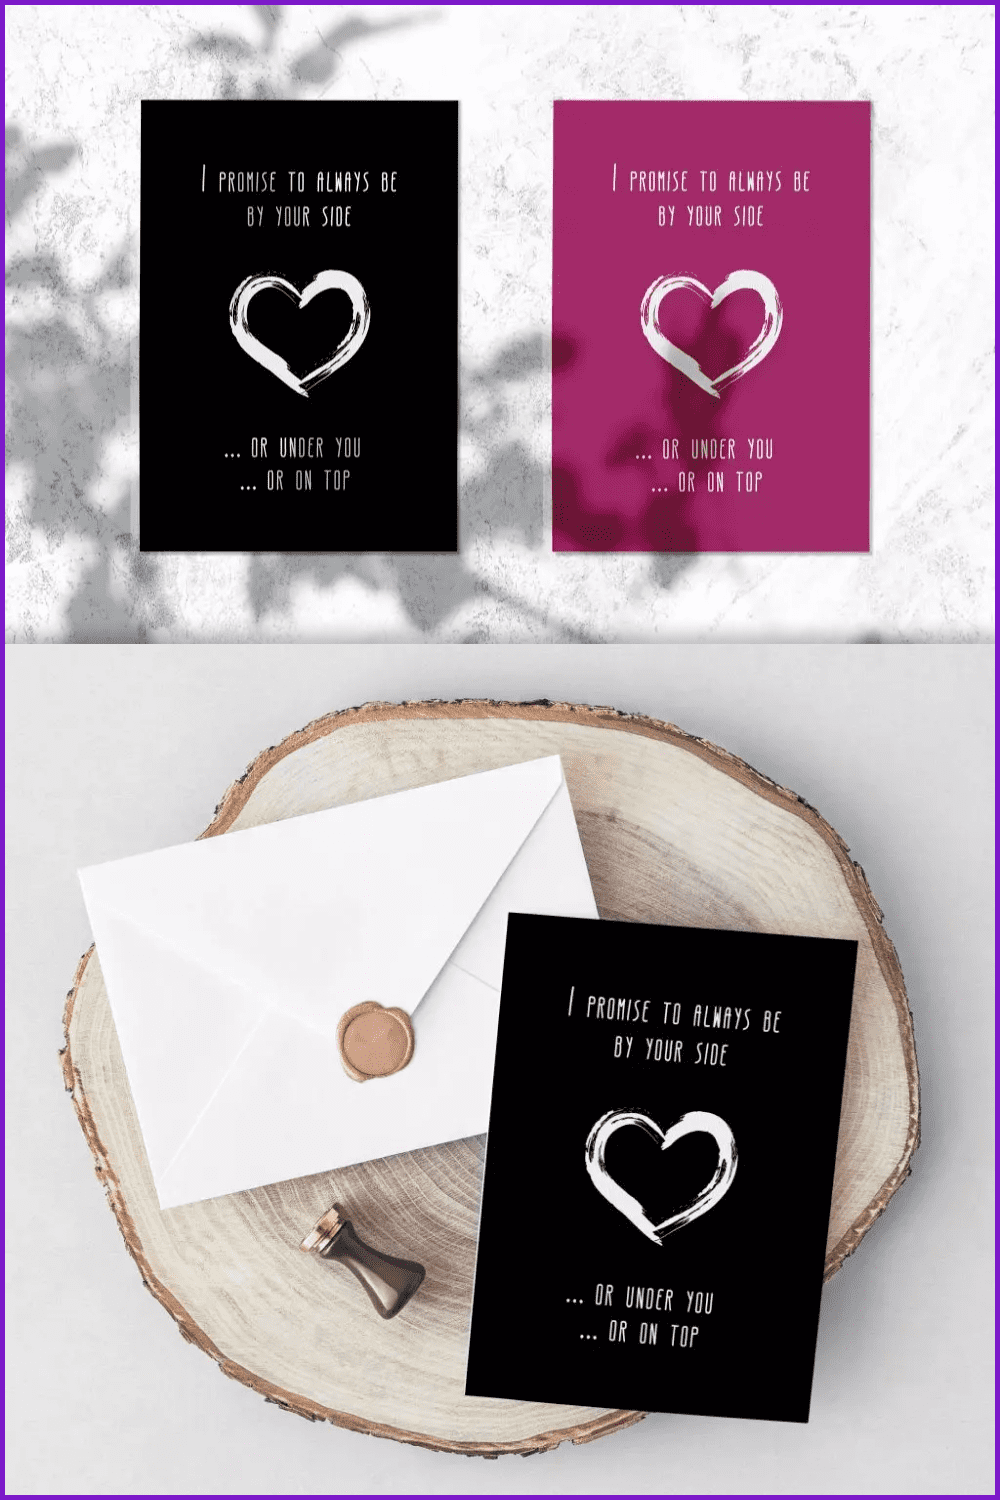 A collage of a pink and black card with a white heart in the middle and thin text.